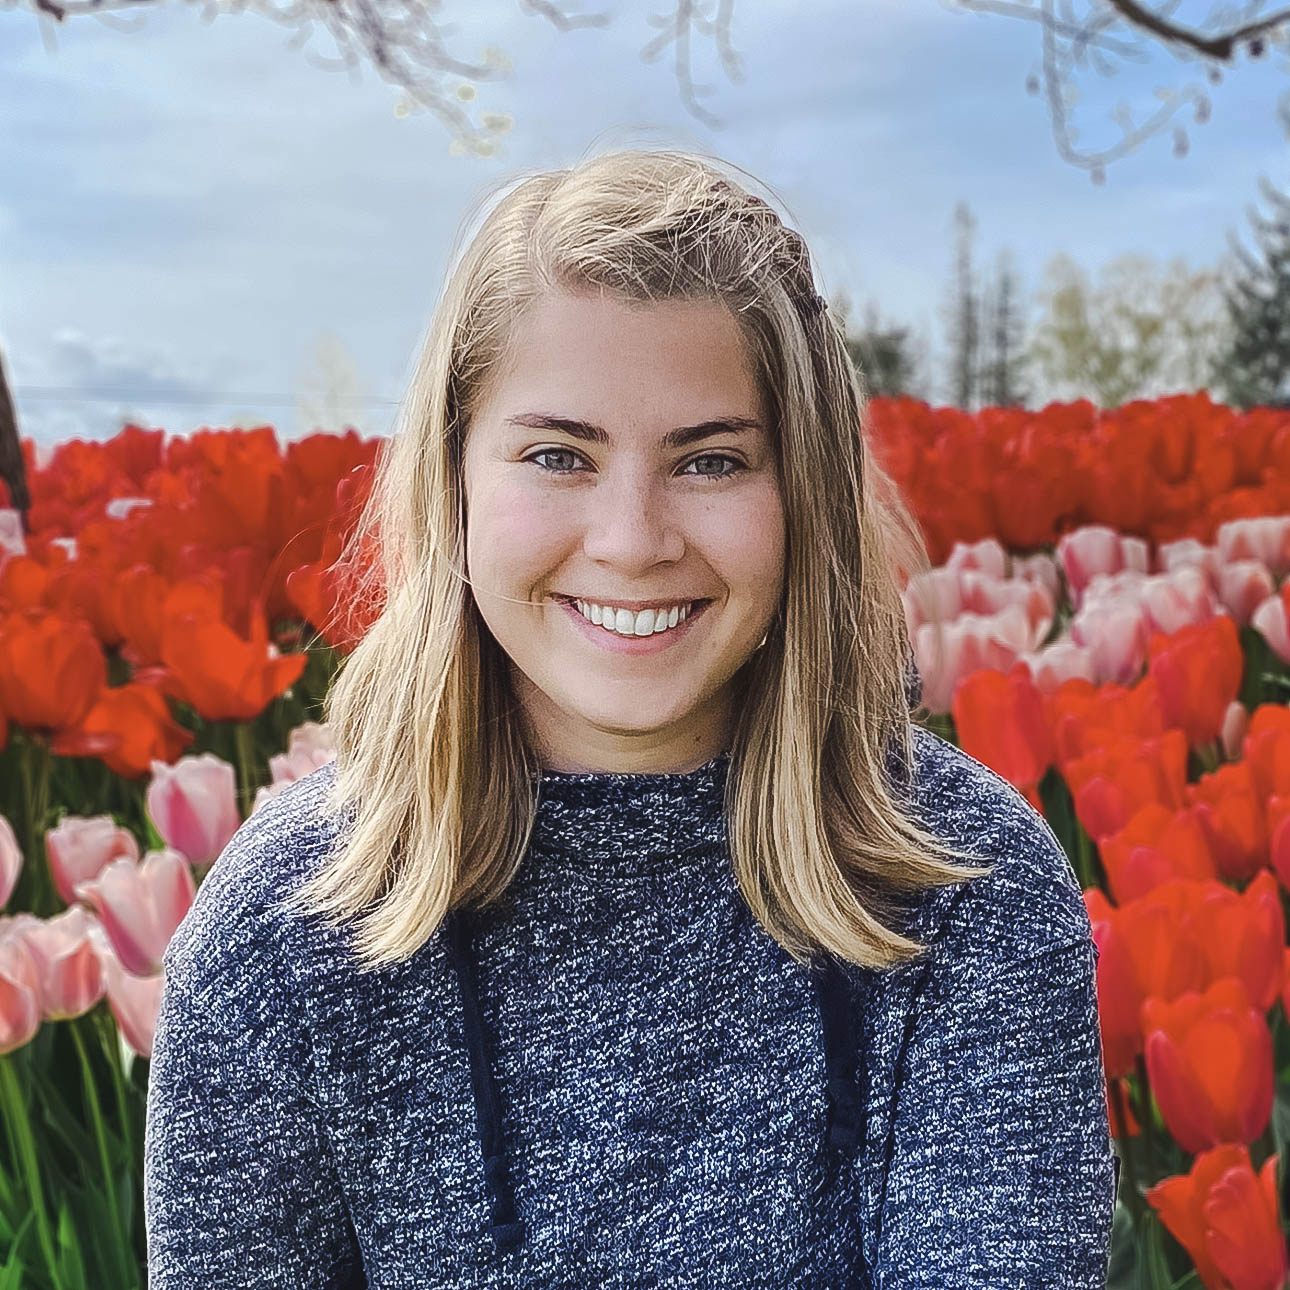 A smiling person with long blond hair wearing a sweater in a field of tulips